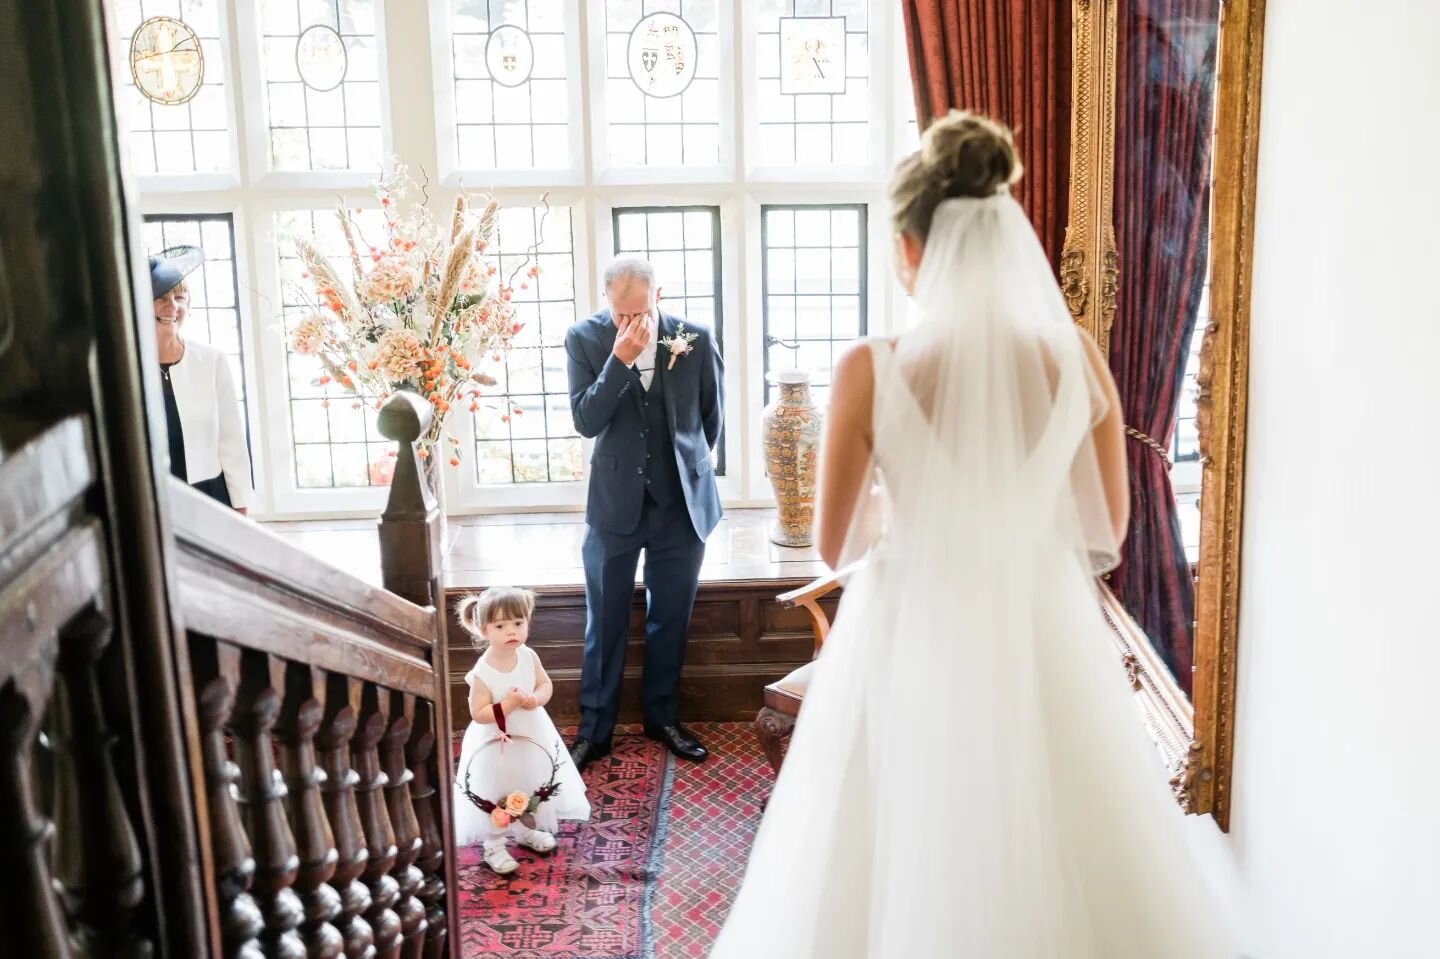 Moments like these ♡
Charlotte's first look with her Dad and not a dry eye in sight! 

Venue @goldsboroughweddings @goldsboroughhall
Florals @yvonnedenniseventflowers 
Cake @hannahskitchenleeds 
Music @shonacrossanmusic